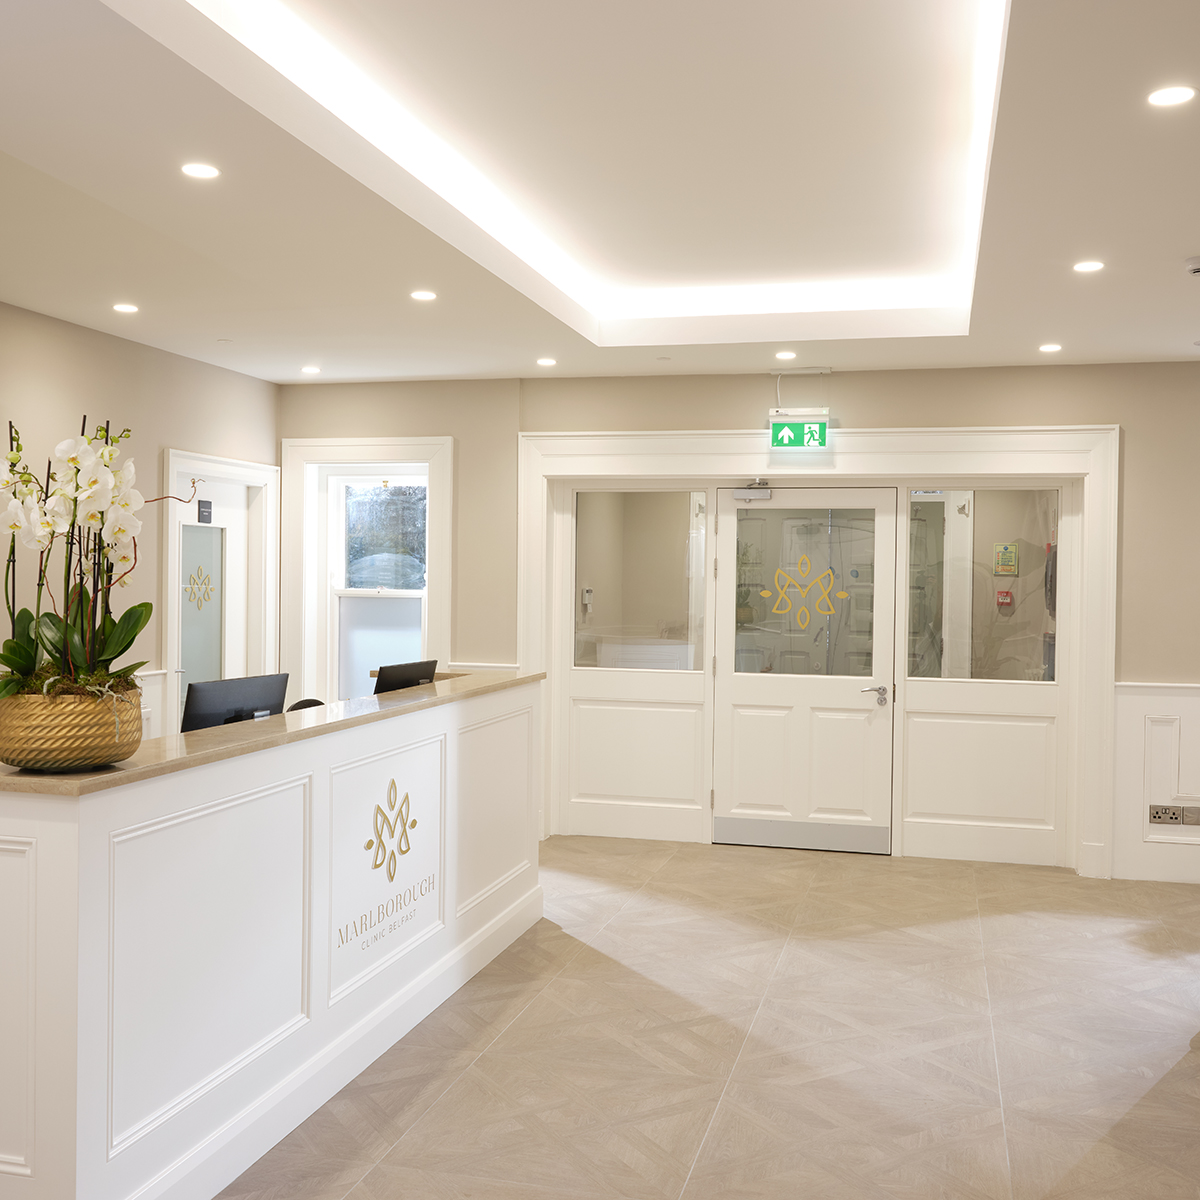 Reception area featuring gold practice logos on reception desk and door glass at Marlborough Clinic Belfast